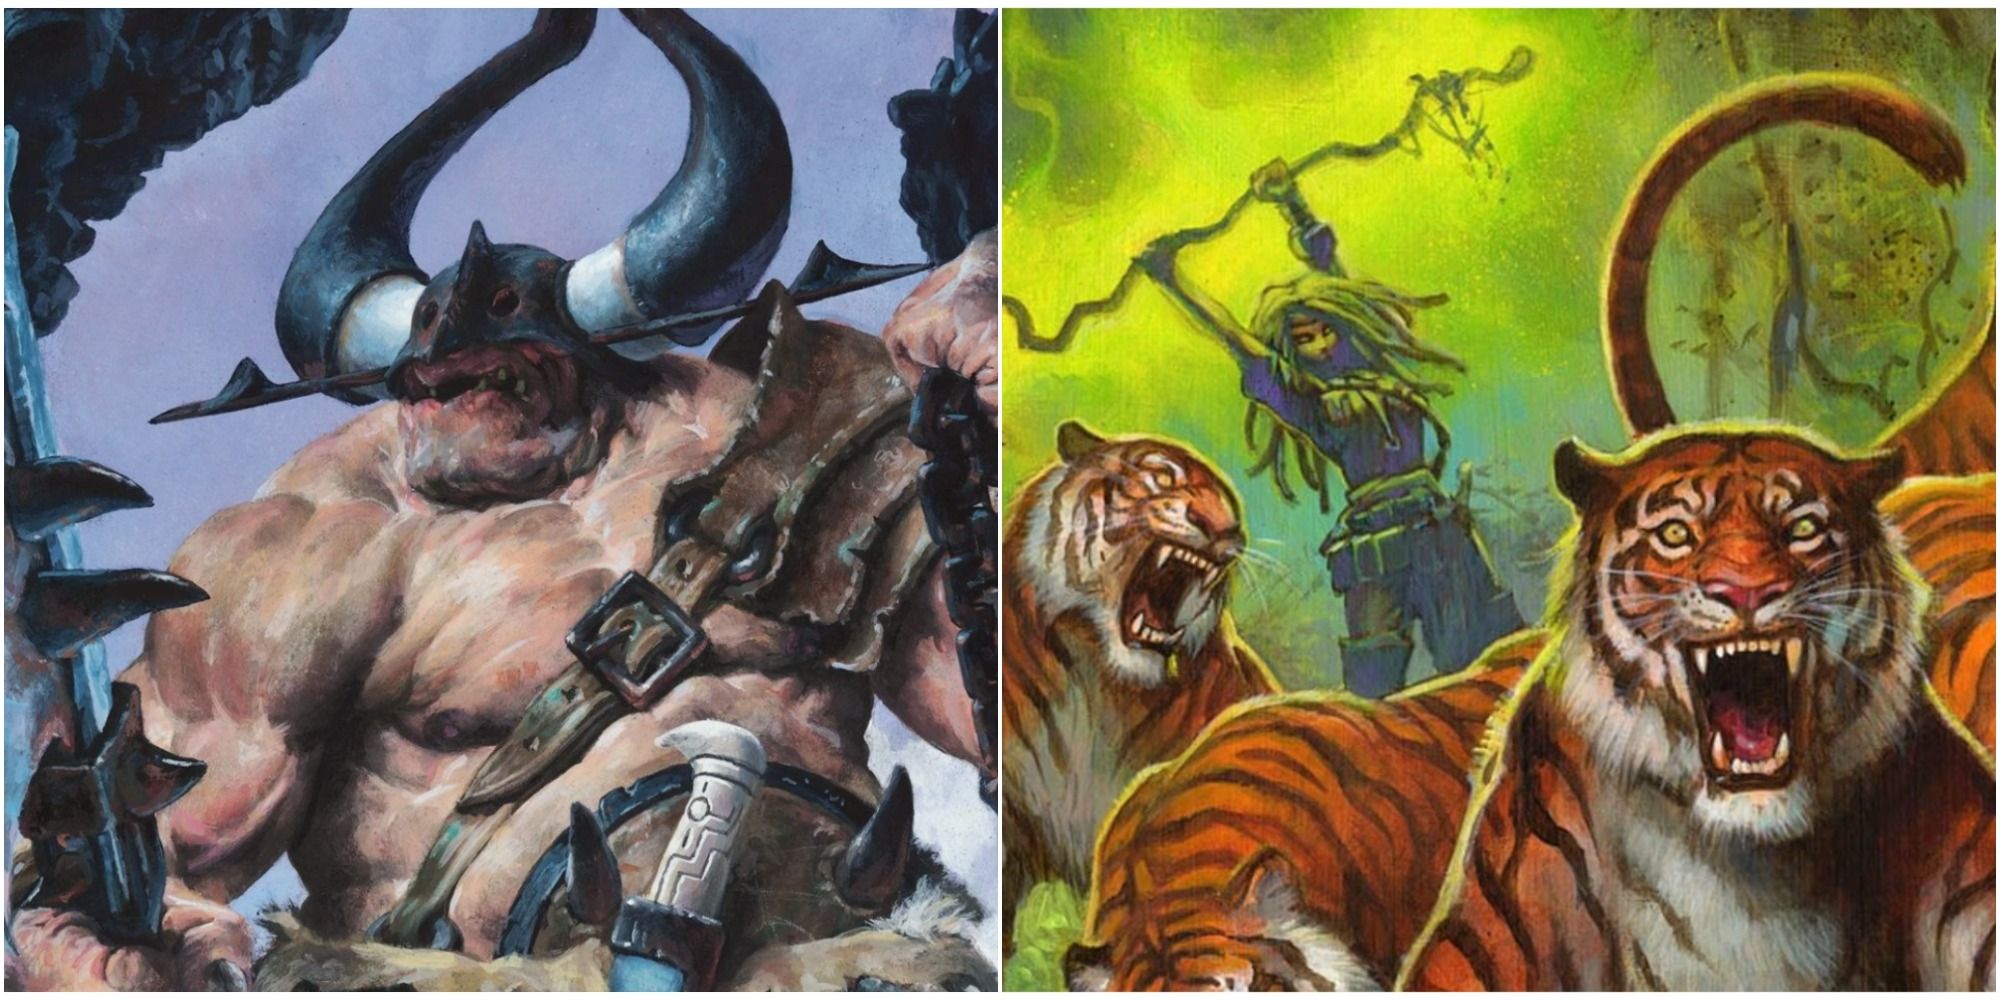 Kazuul, Tyrant of the Cliffs by Paul Bonner and Beastmaster Ascension by Alex Horley-Orlandelli